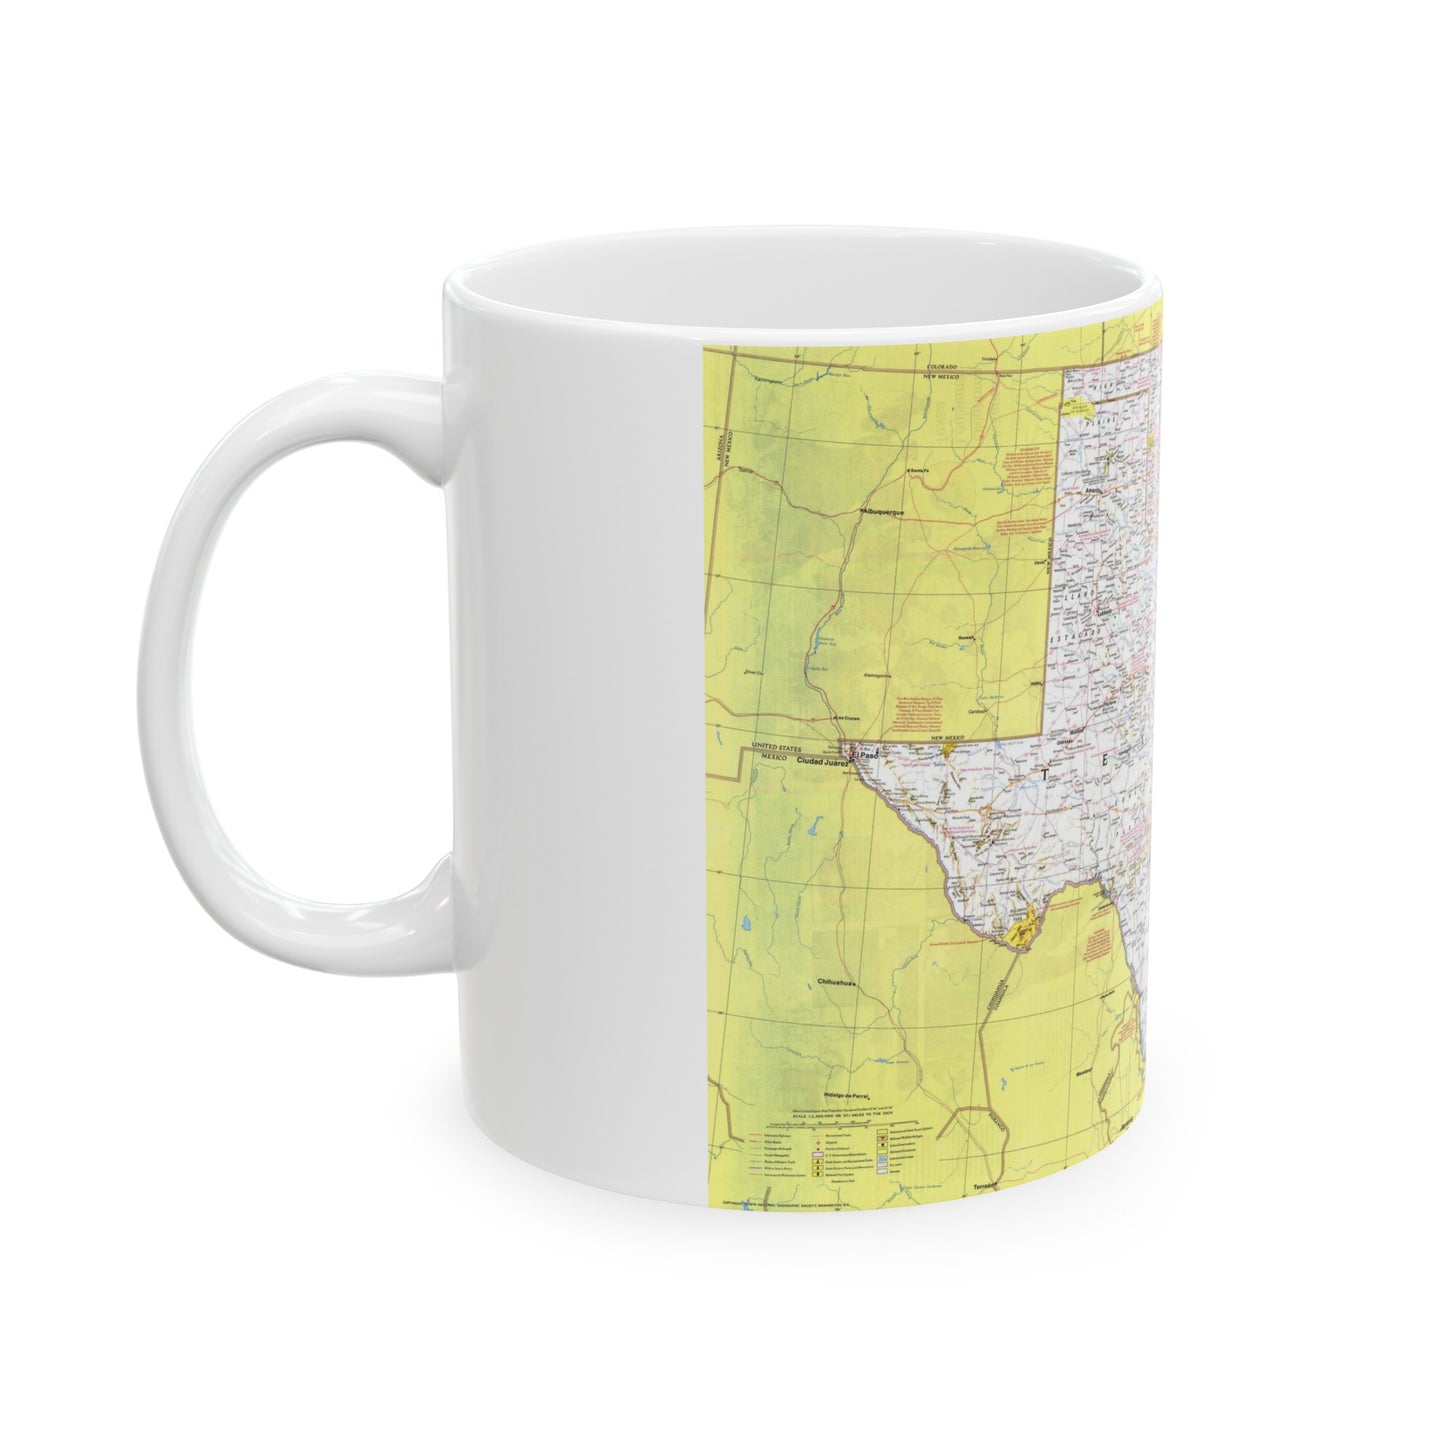 USA - South Central States 1 (1974) (Map) White Coffee Mug-The Sticker Space